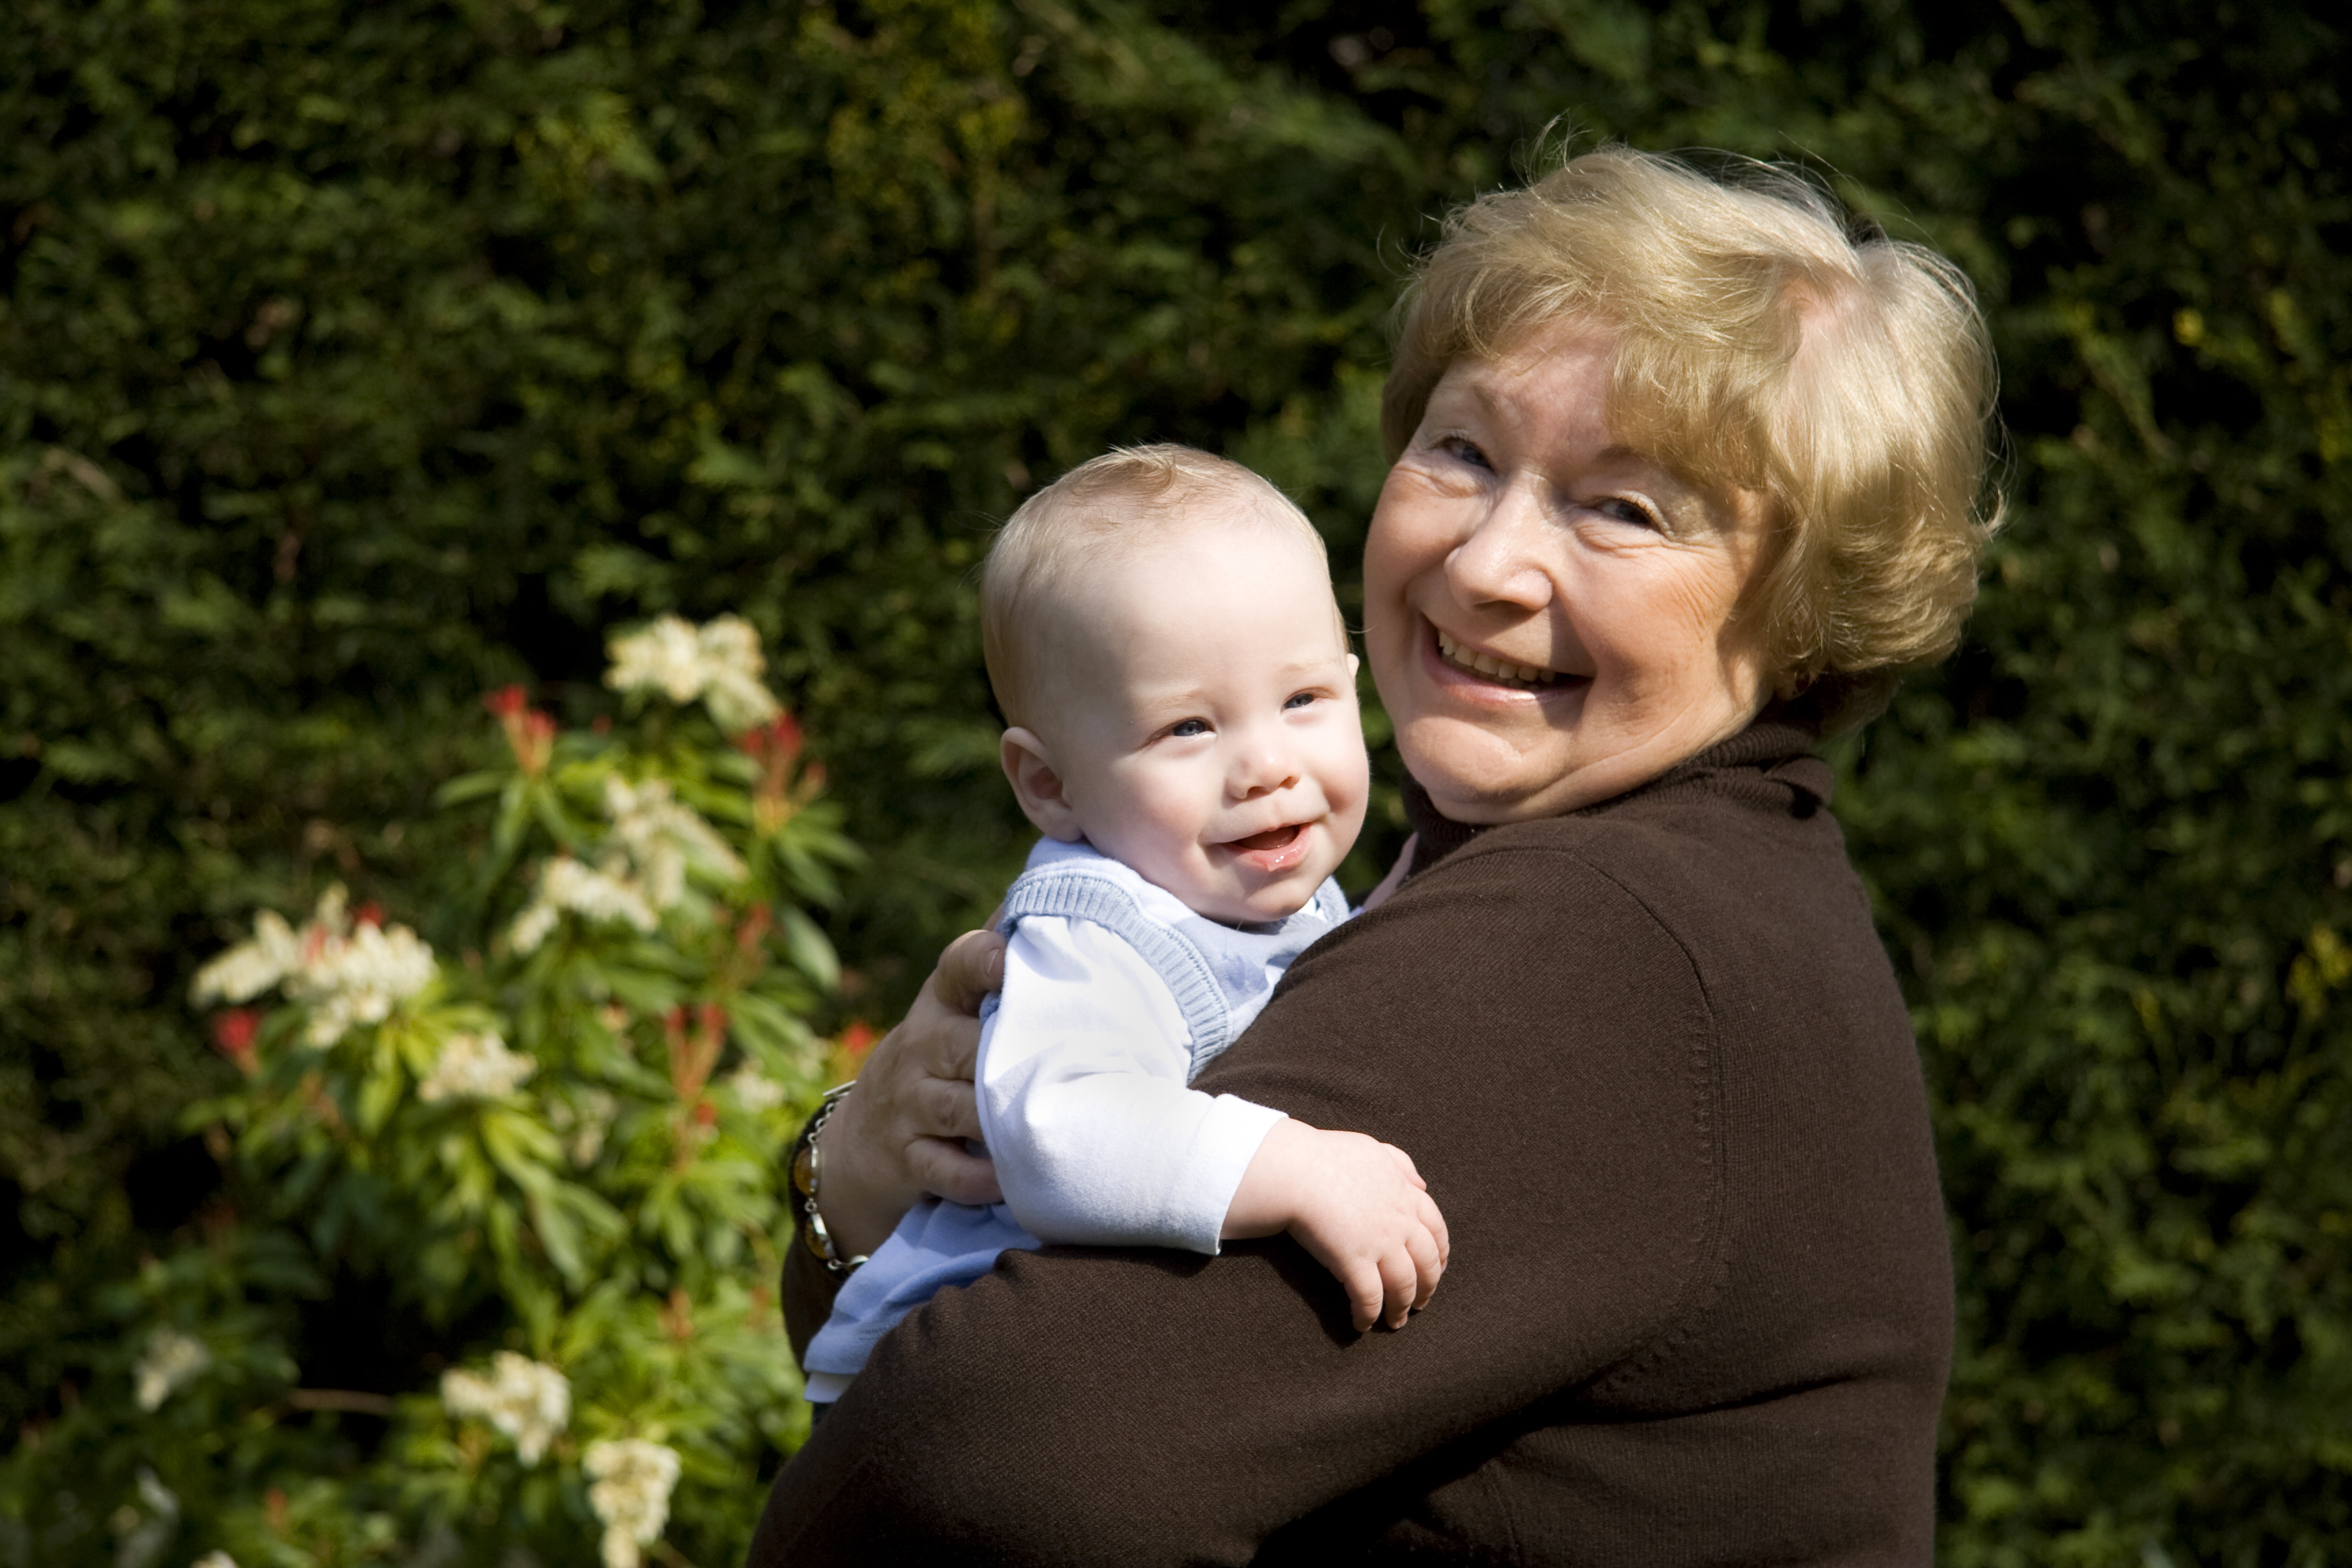 An older woman smiling while snuggling a happy baby | Source: Shutterstock